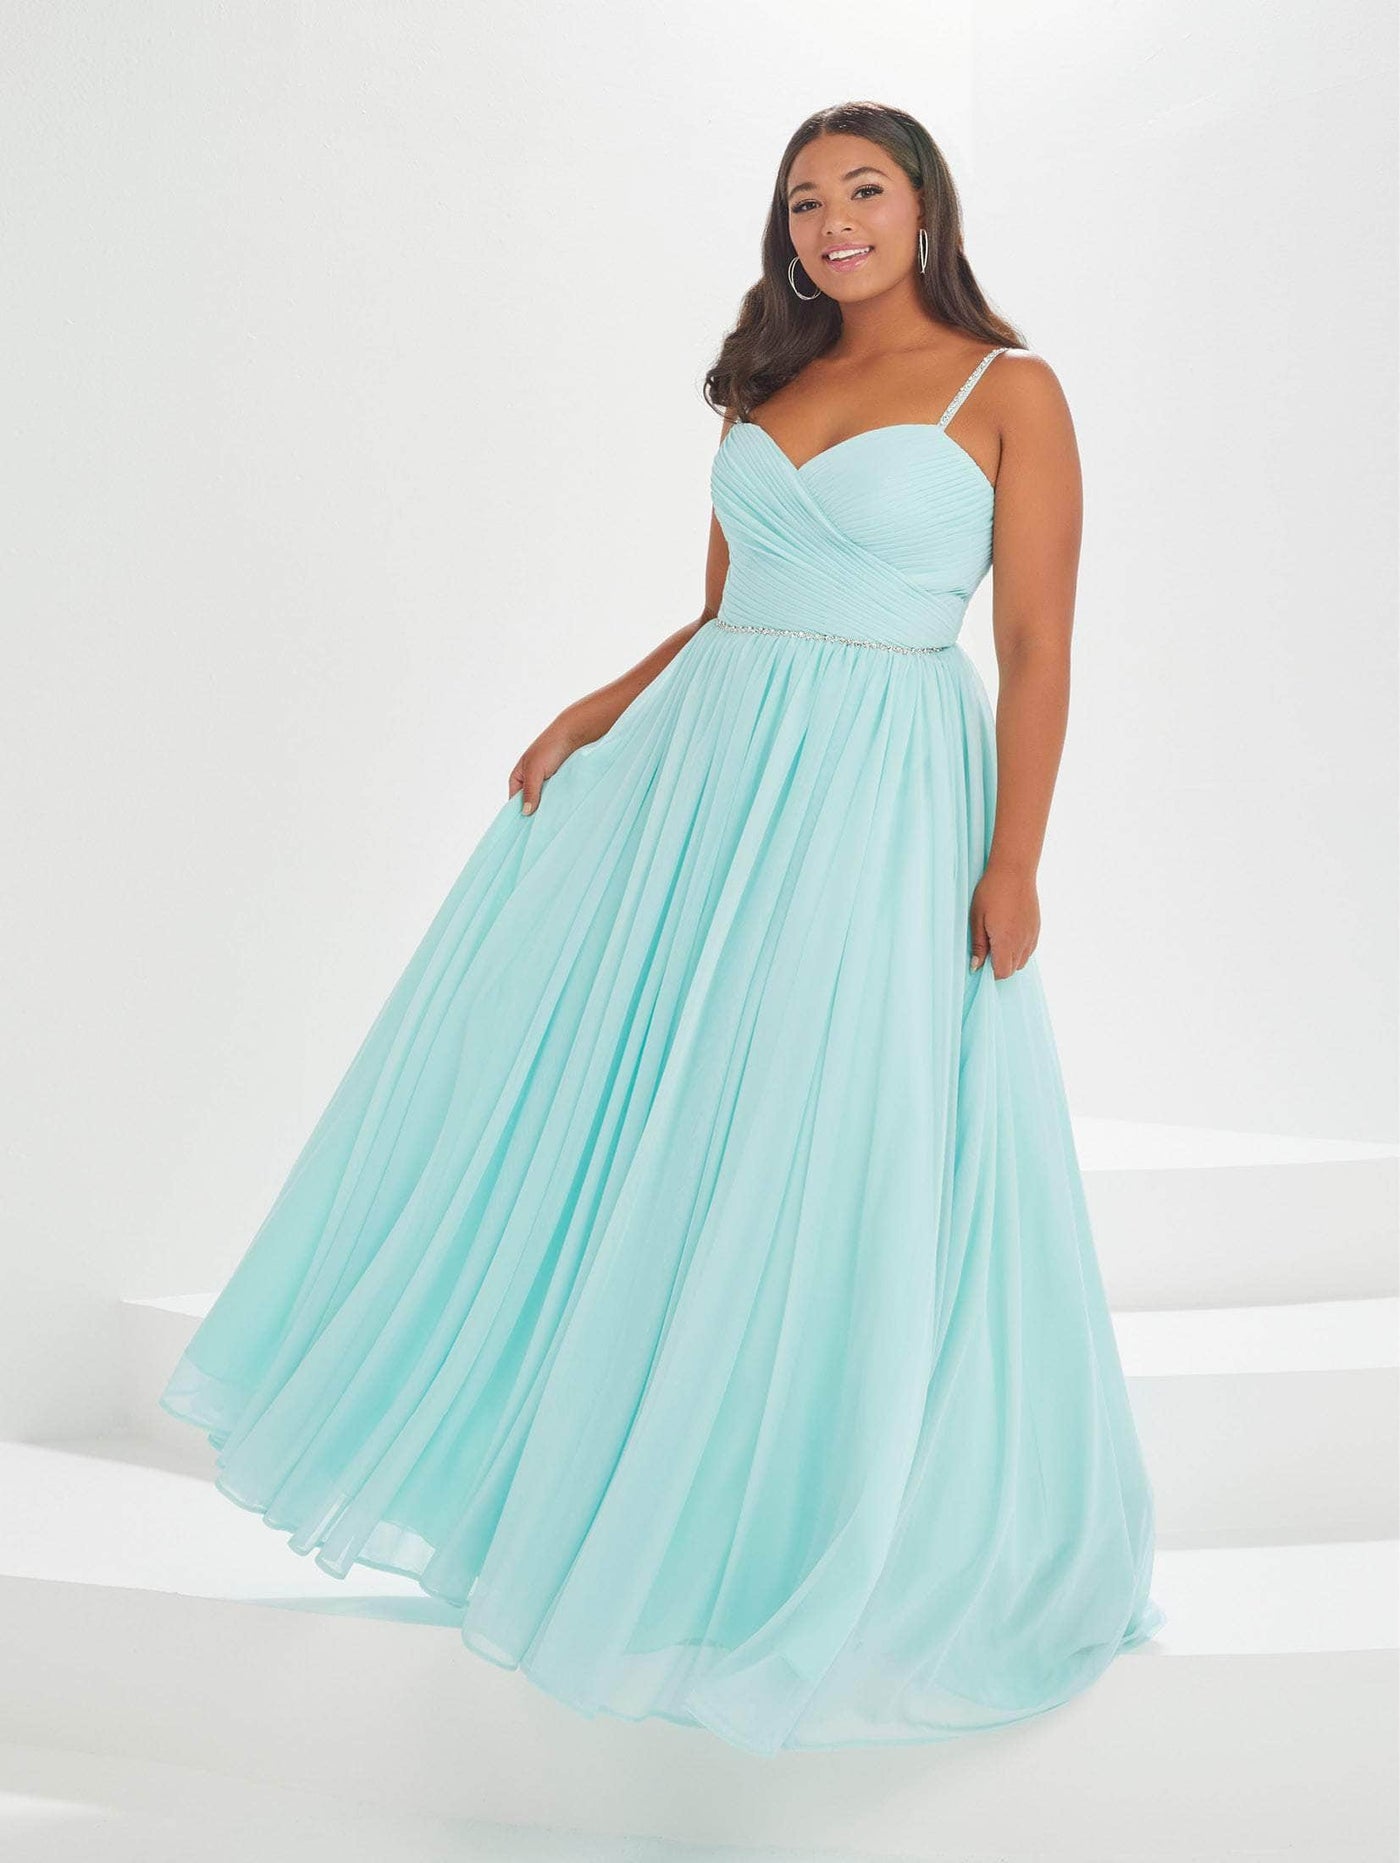 Tiffany Designs by Christina Wu 16036 - Pleated Chiffon Prom Gown Special Occasion Dress